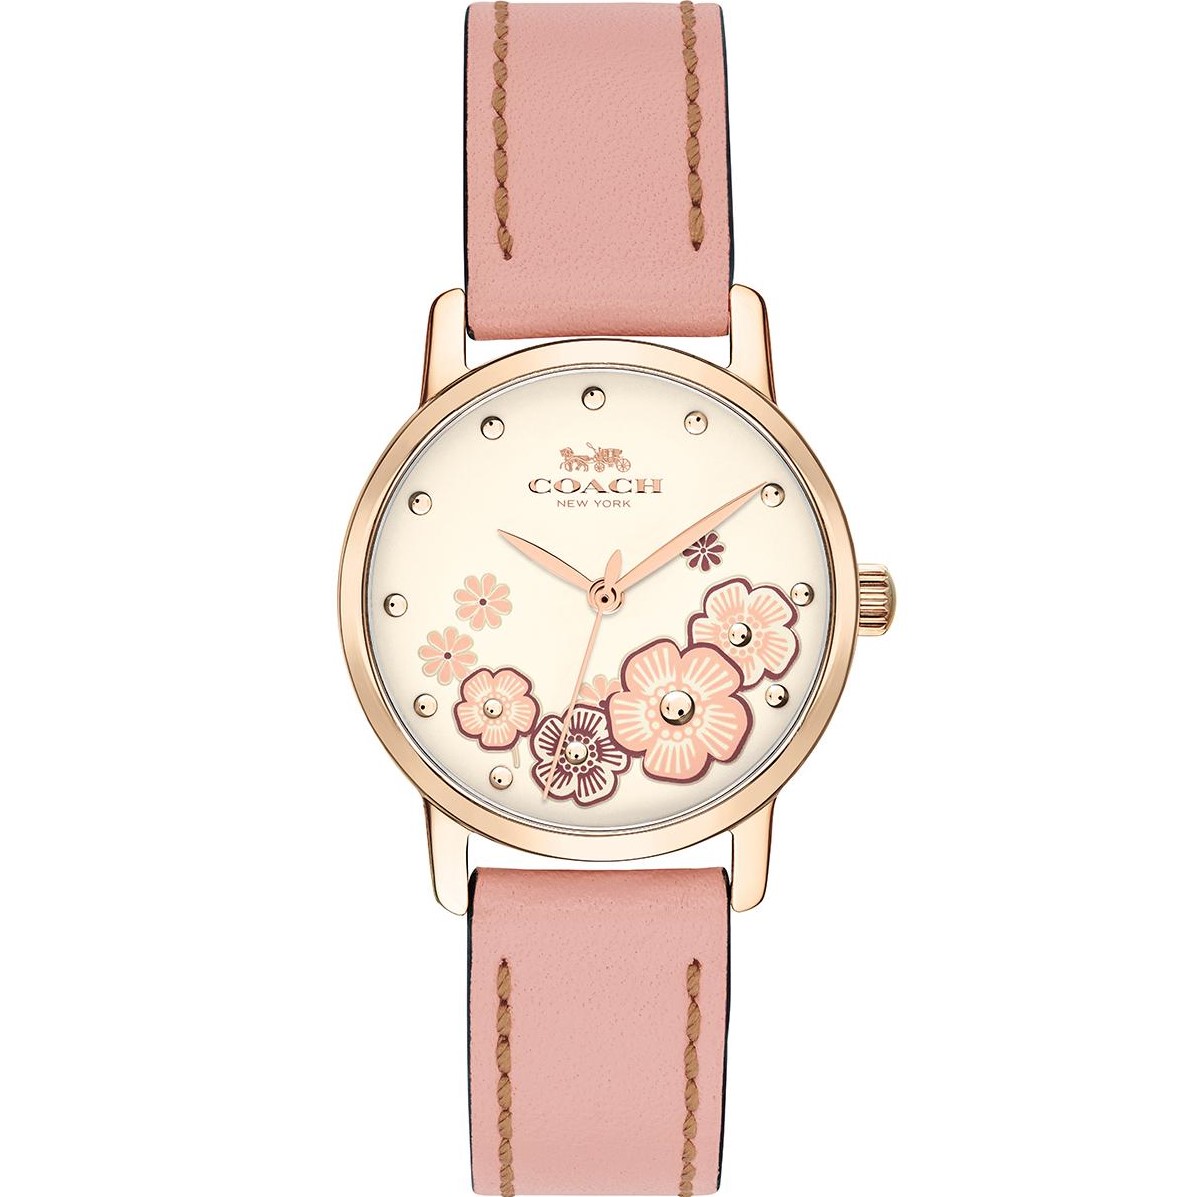 ĐỒNG HỒ NỮ COACH FLORAL GRAND ANALOG QUART GOLD STAINLESS STEEL PINK LEATHER STRAP WOMEN WATCH 14503060 1